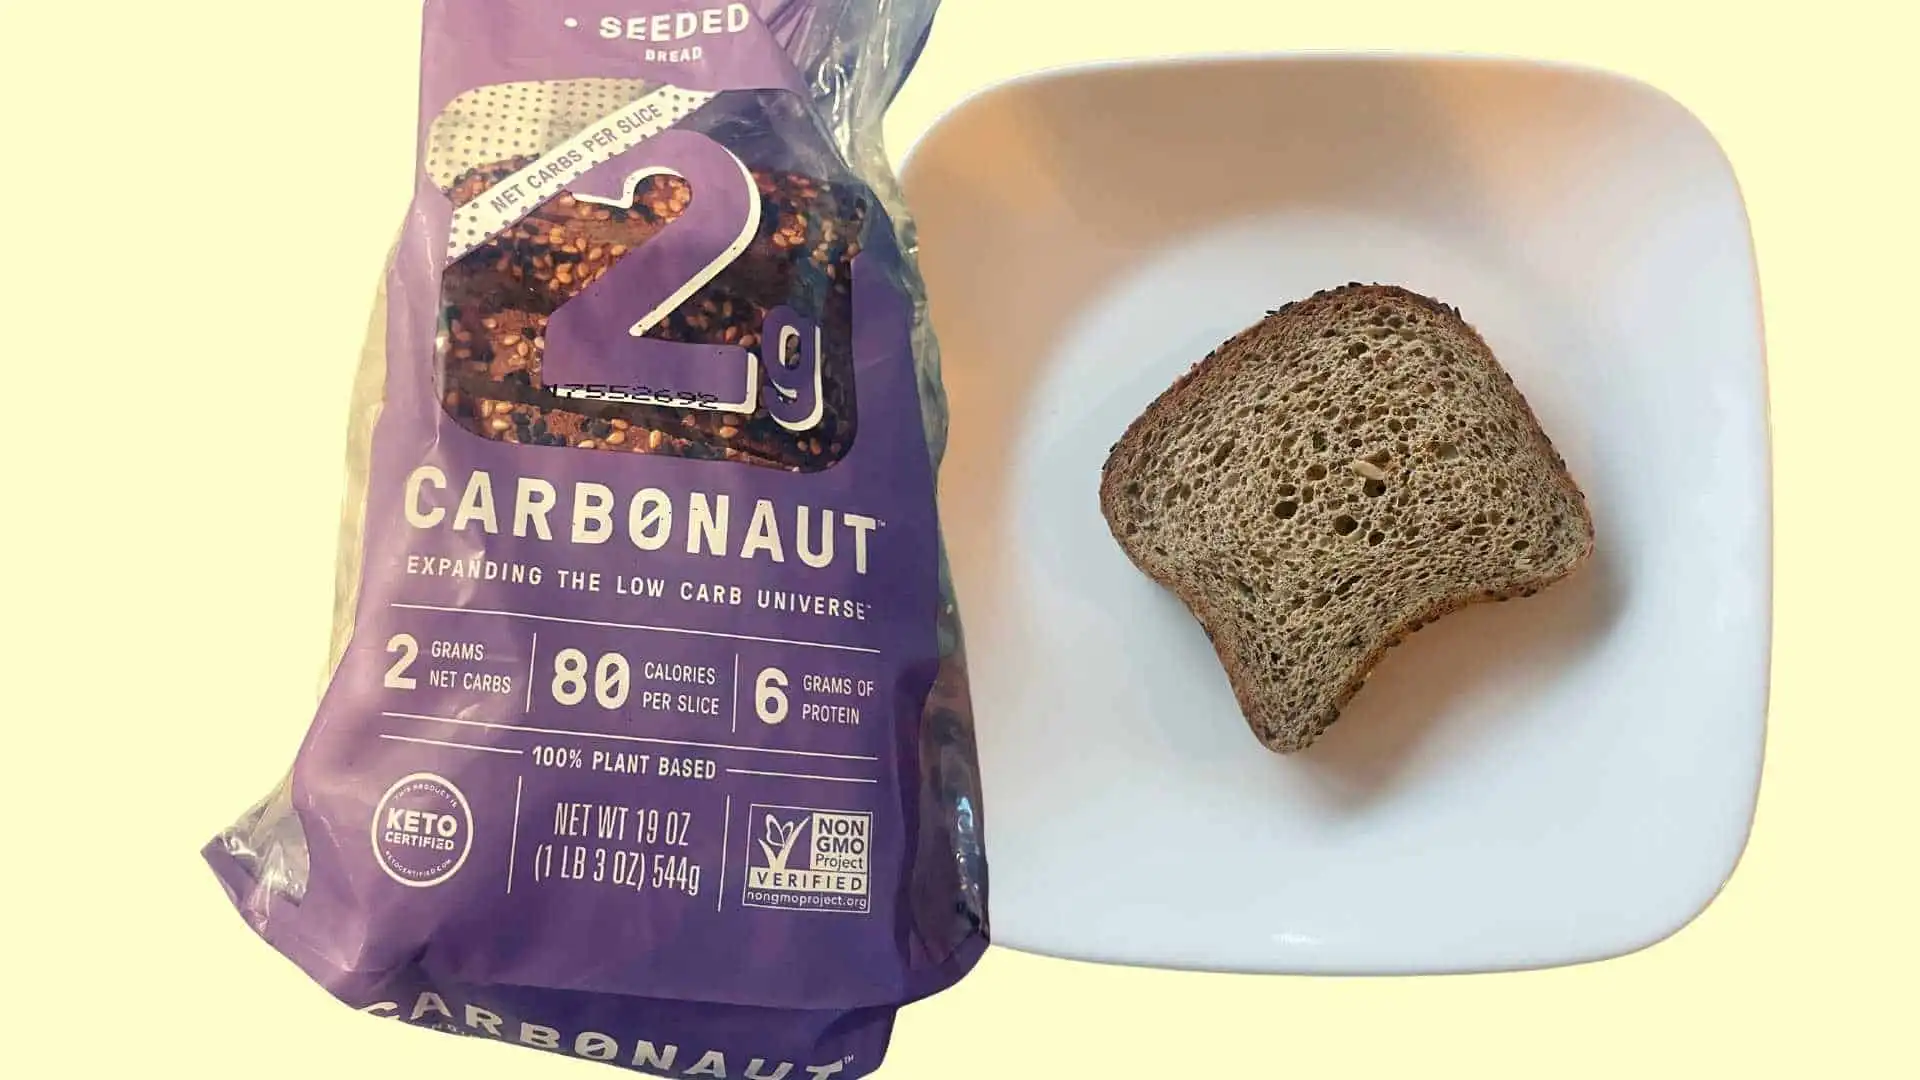 Carbonaut Seeded Bread: 2g net carbs, 80 calories, 6 g protein